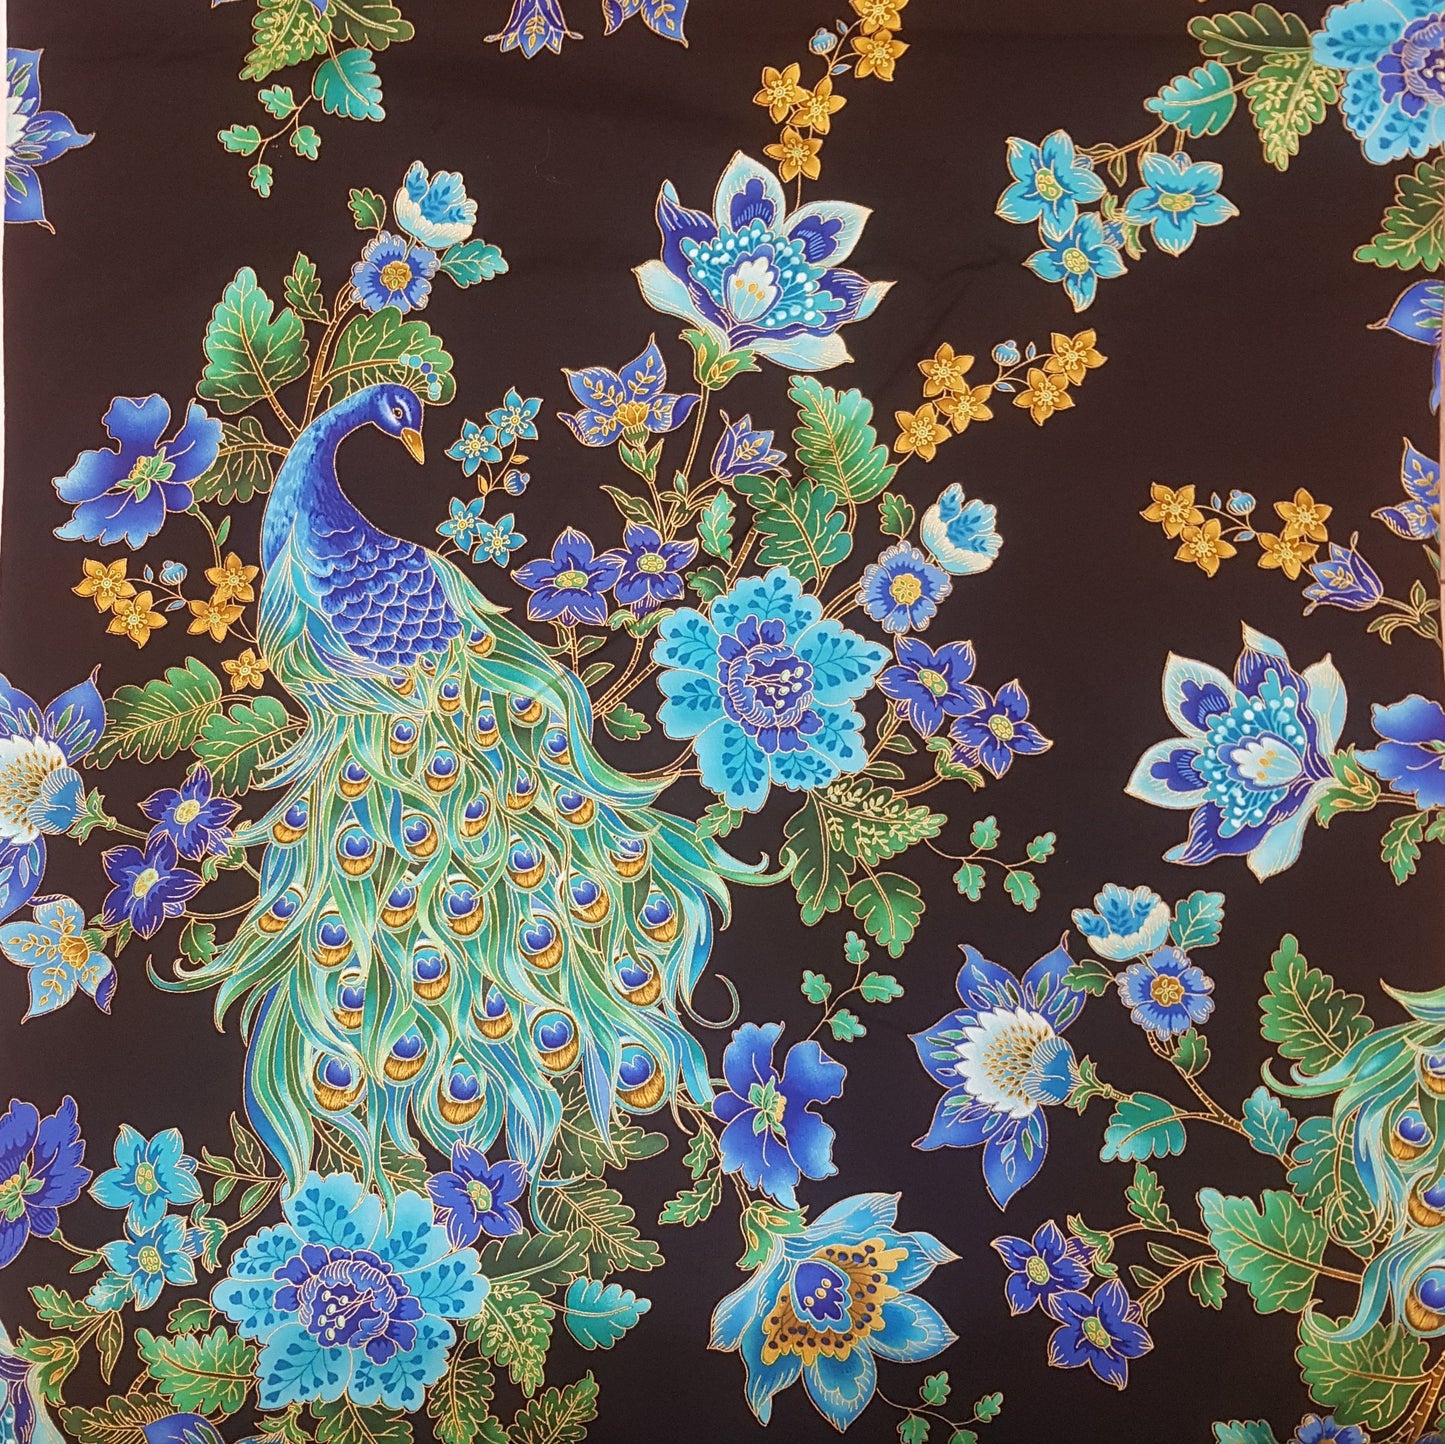 Timeless Treasures Peacocks and Flower Print Cotton Fabric